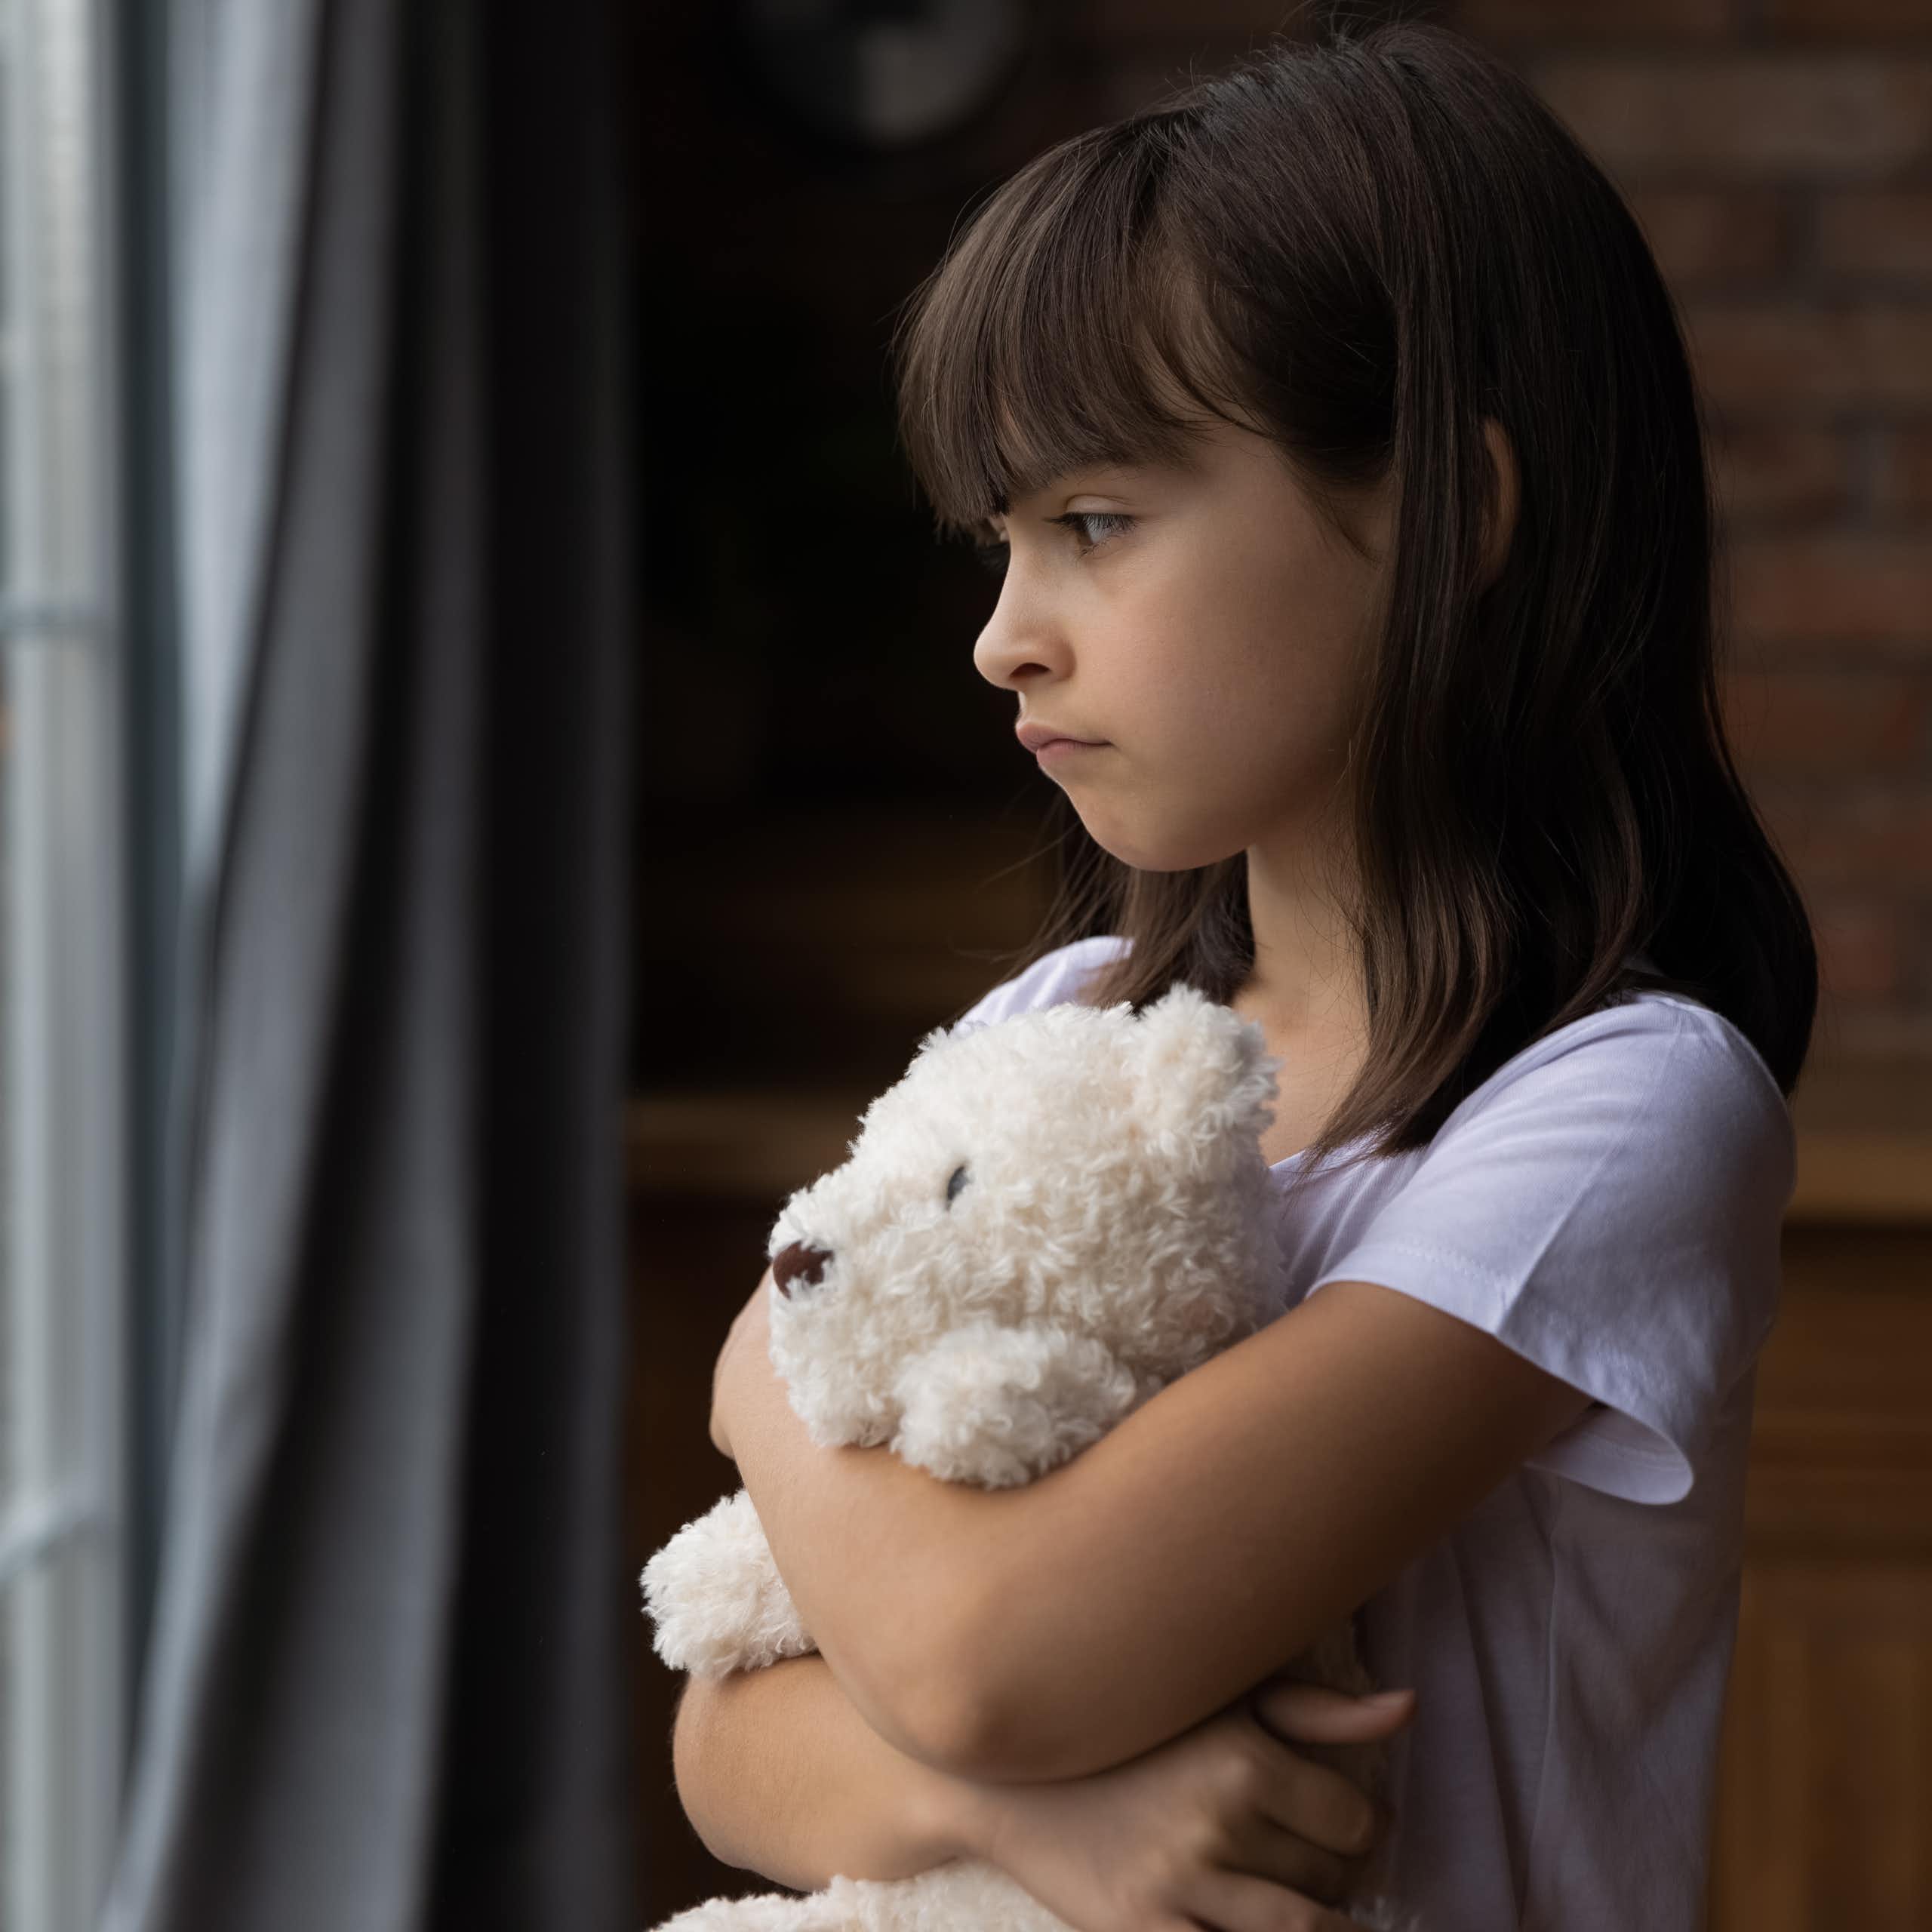 A child hugging a stuffed toy, looking out a window looking unhappy